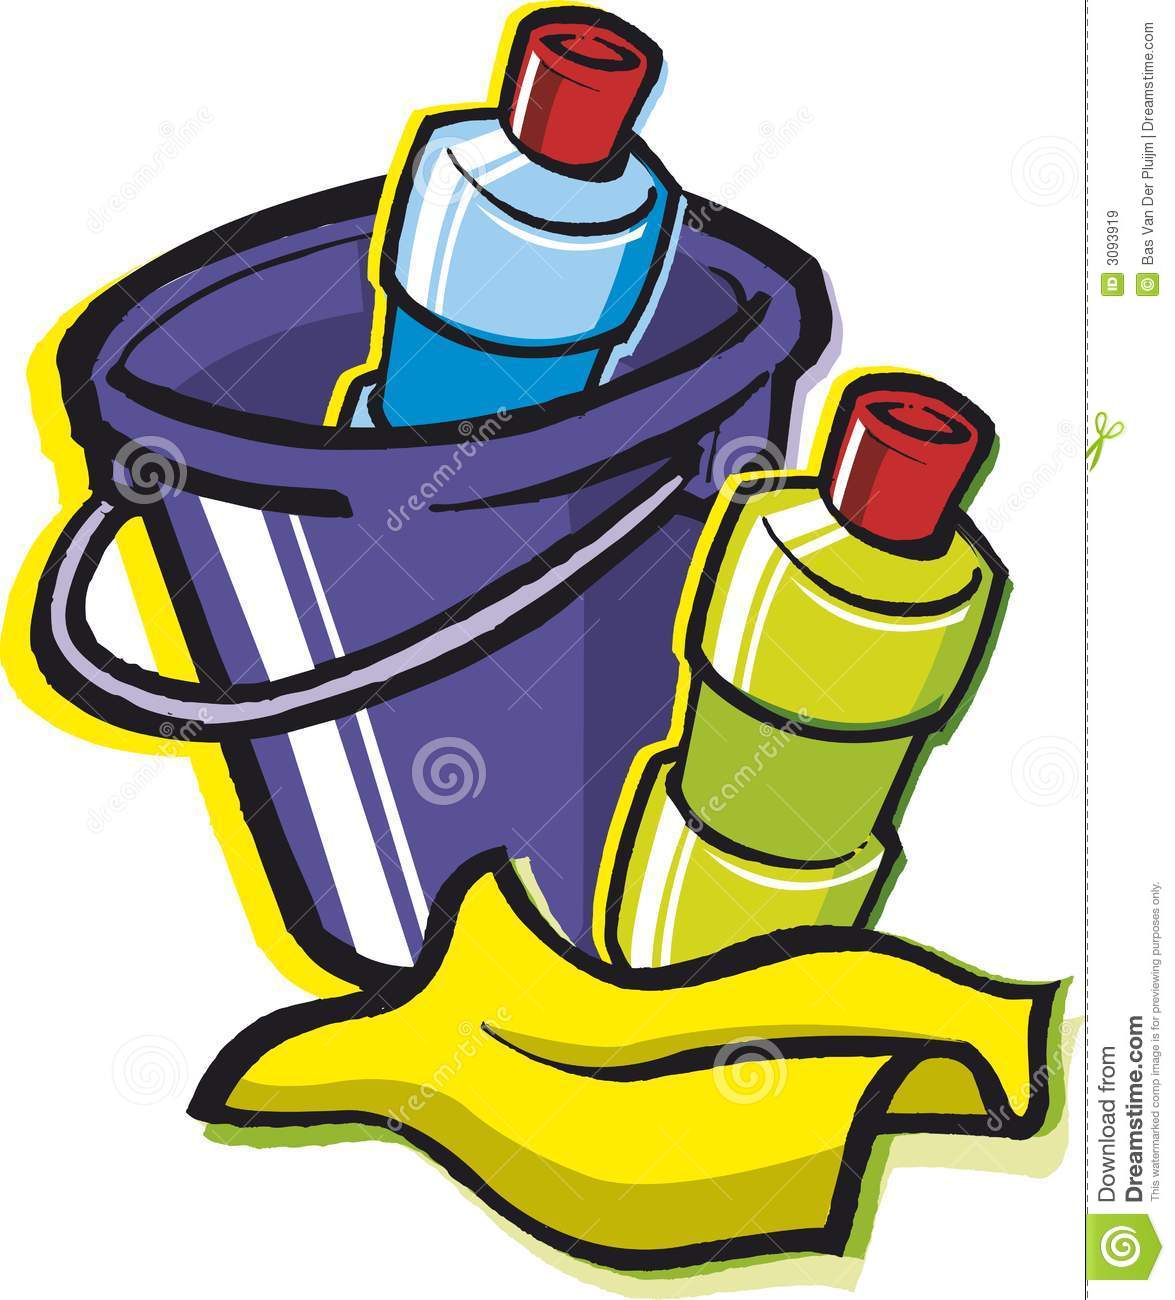 Janitorial Supplies Clipart   Cliparthut   Free Clipart